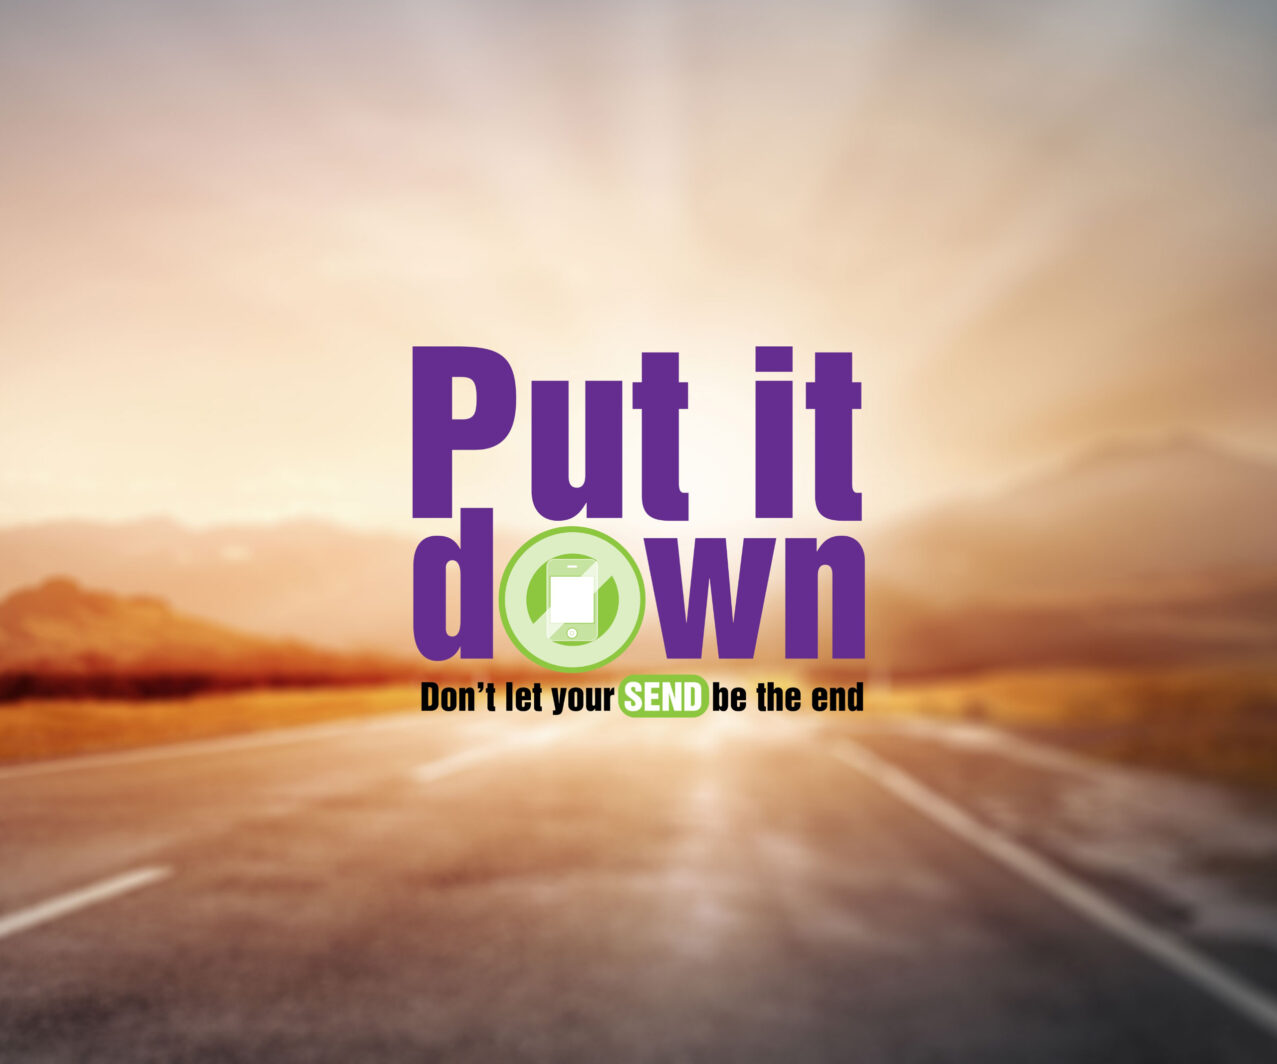 Put it down campaign: Don’t let your send be the end